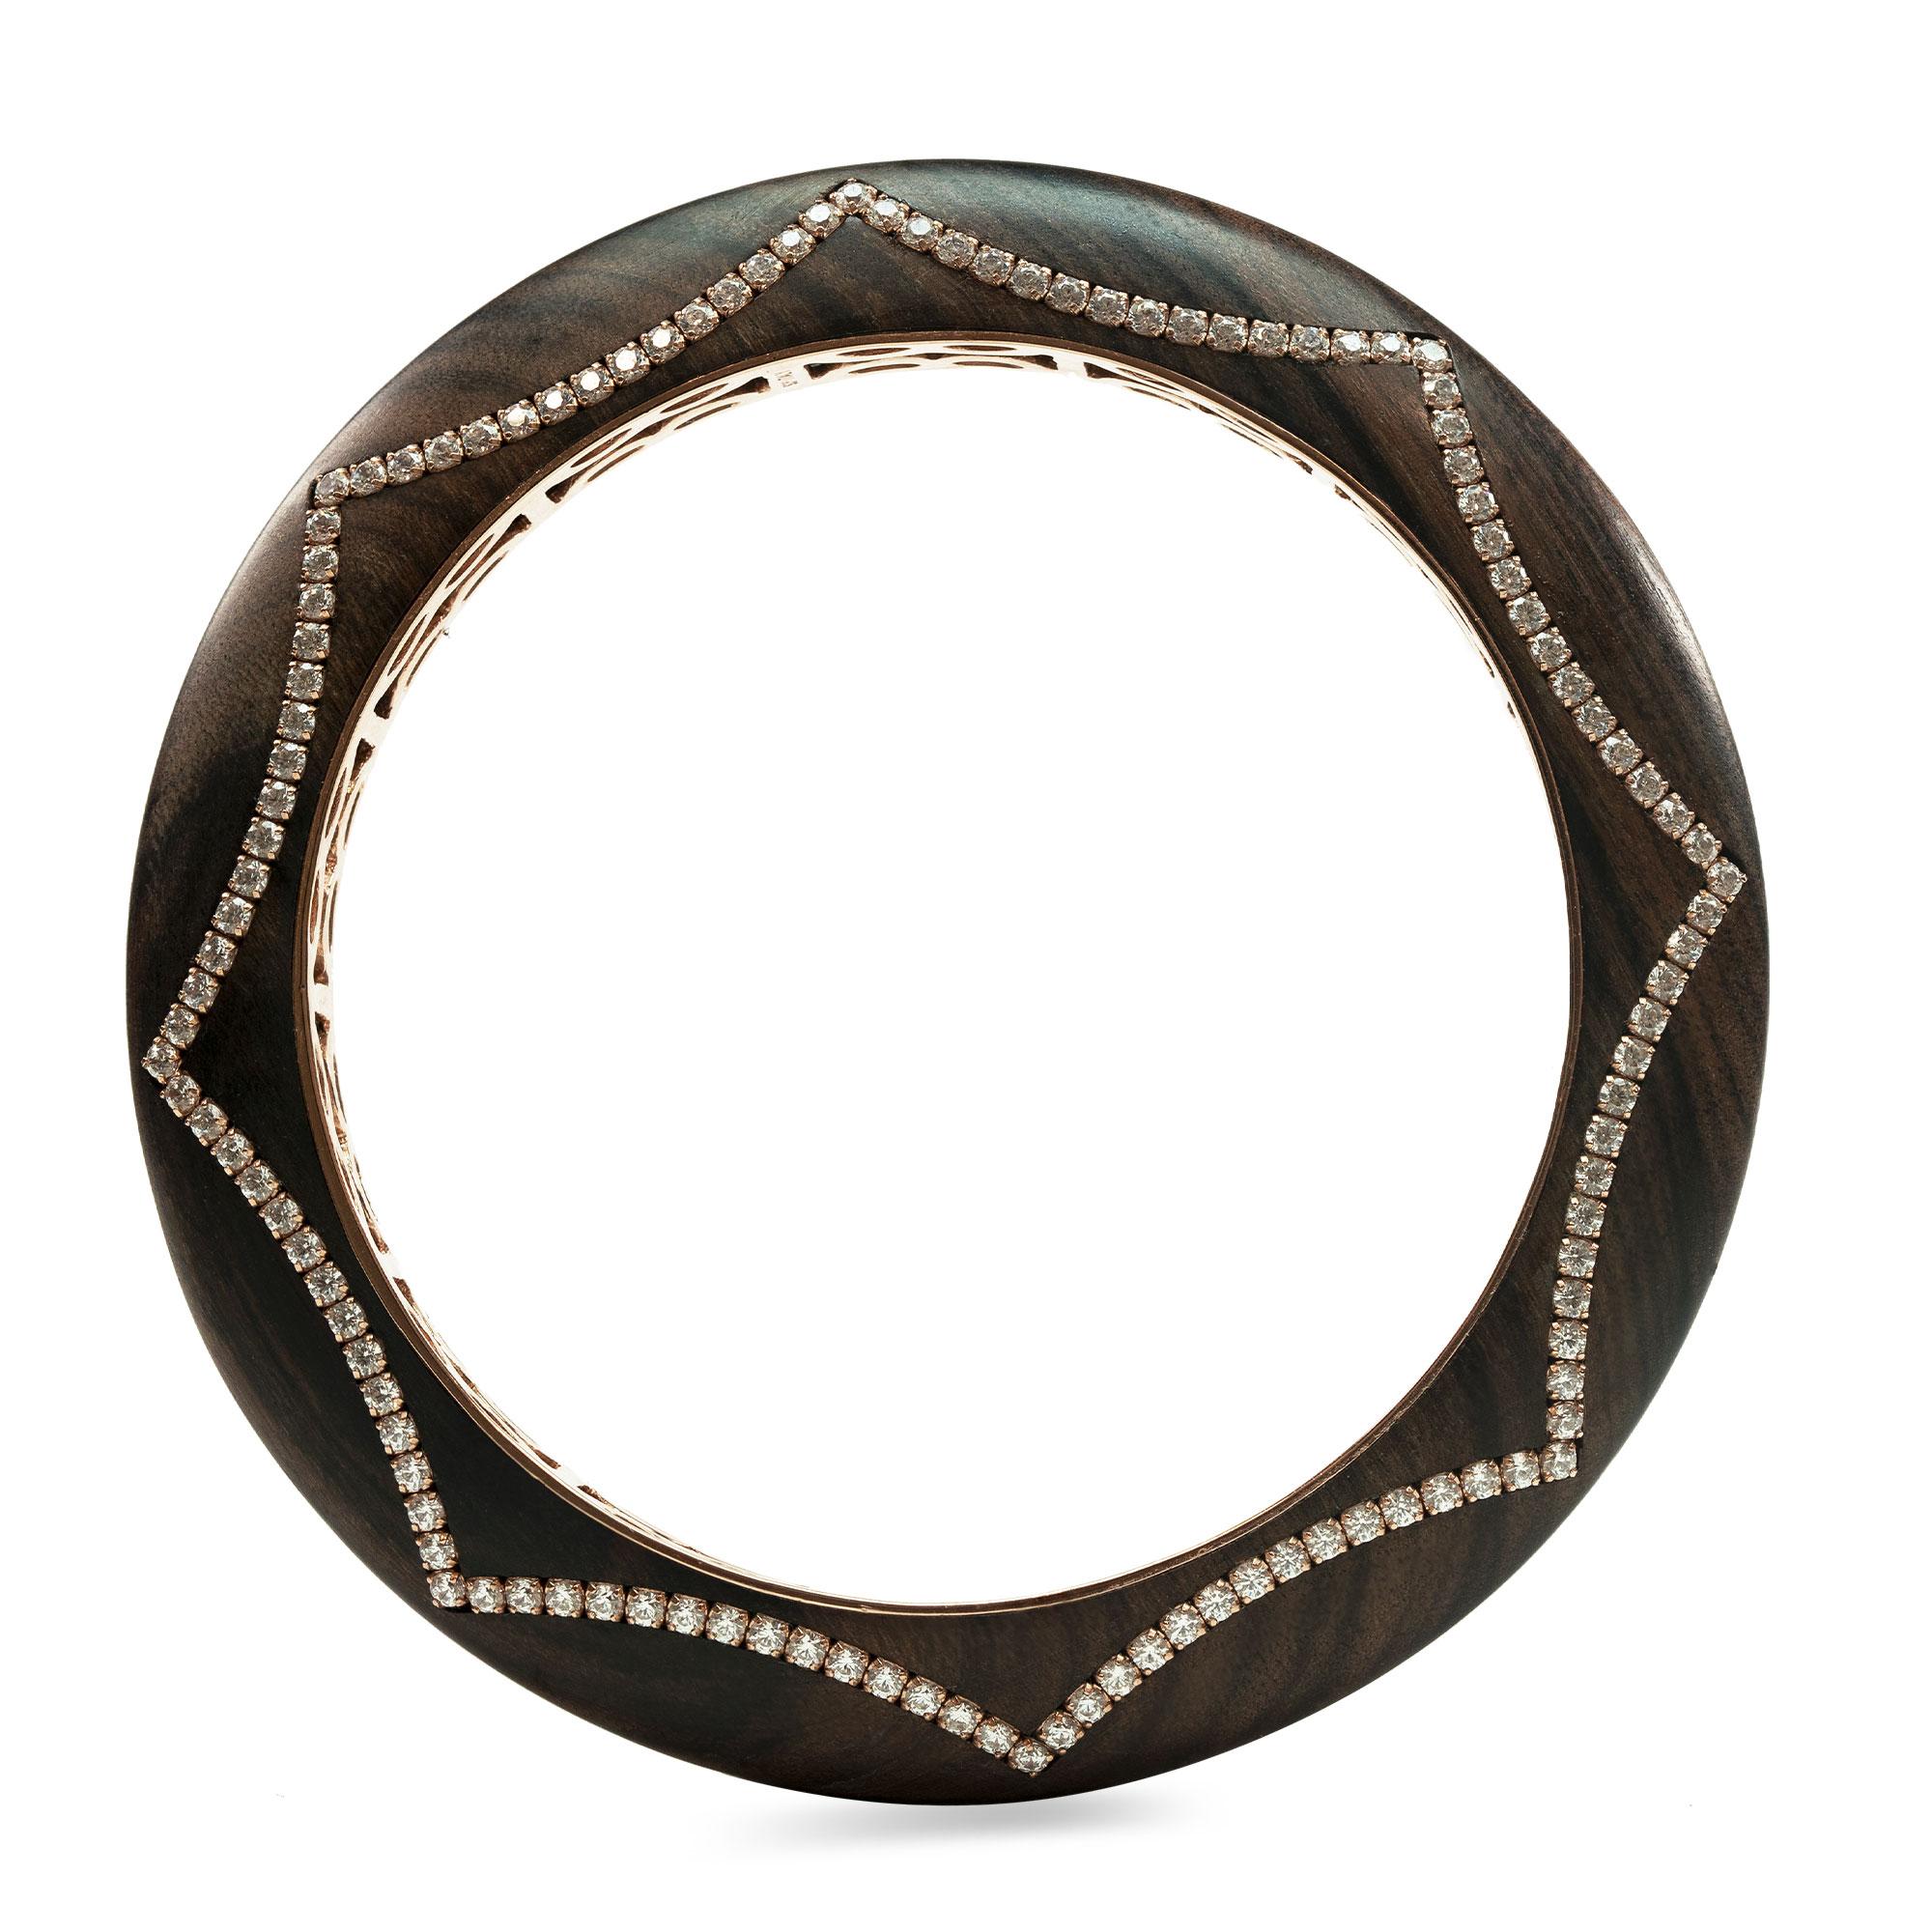 Enairo Rosewood 18k Gold Diamond Bracelet Bangle

This refined piece with its organic shape is carved in stunning rosewood, made of 18k rose gold and set with 240 GVS white diamond stones. 

Our pieces are customizable. Please contact us before